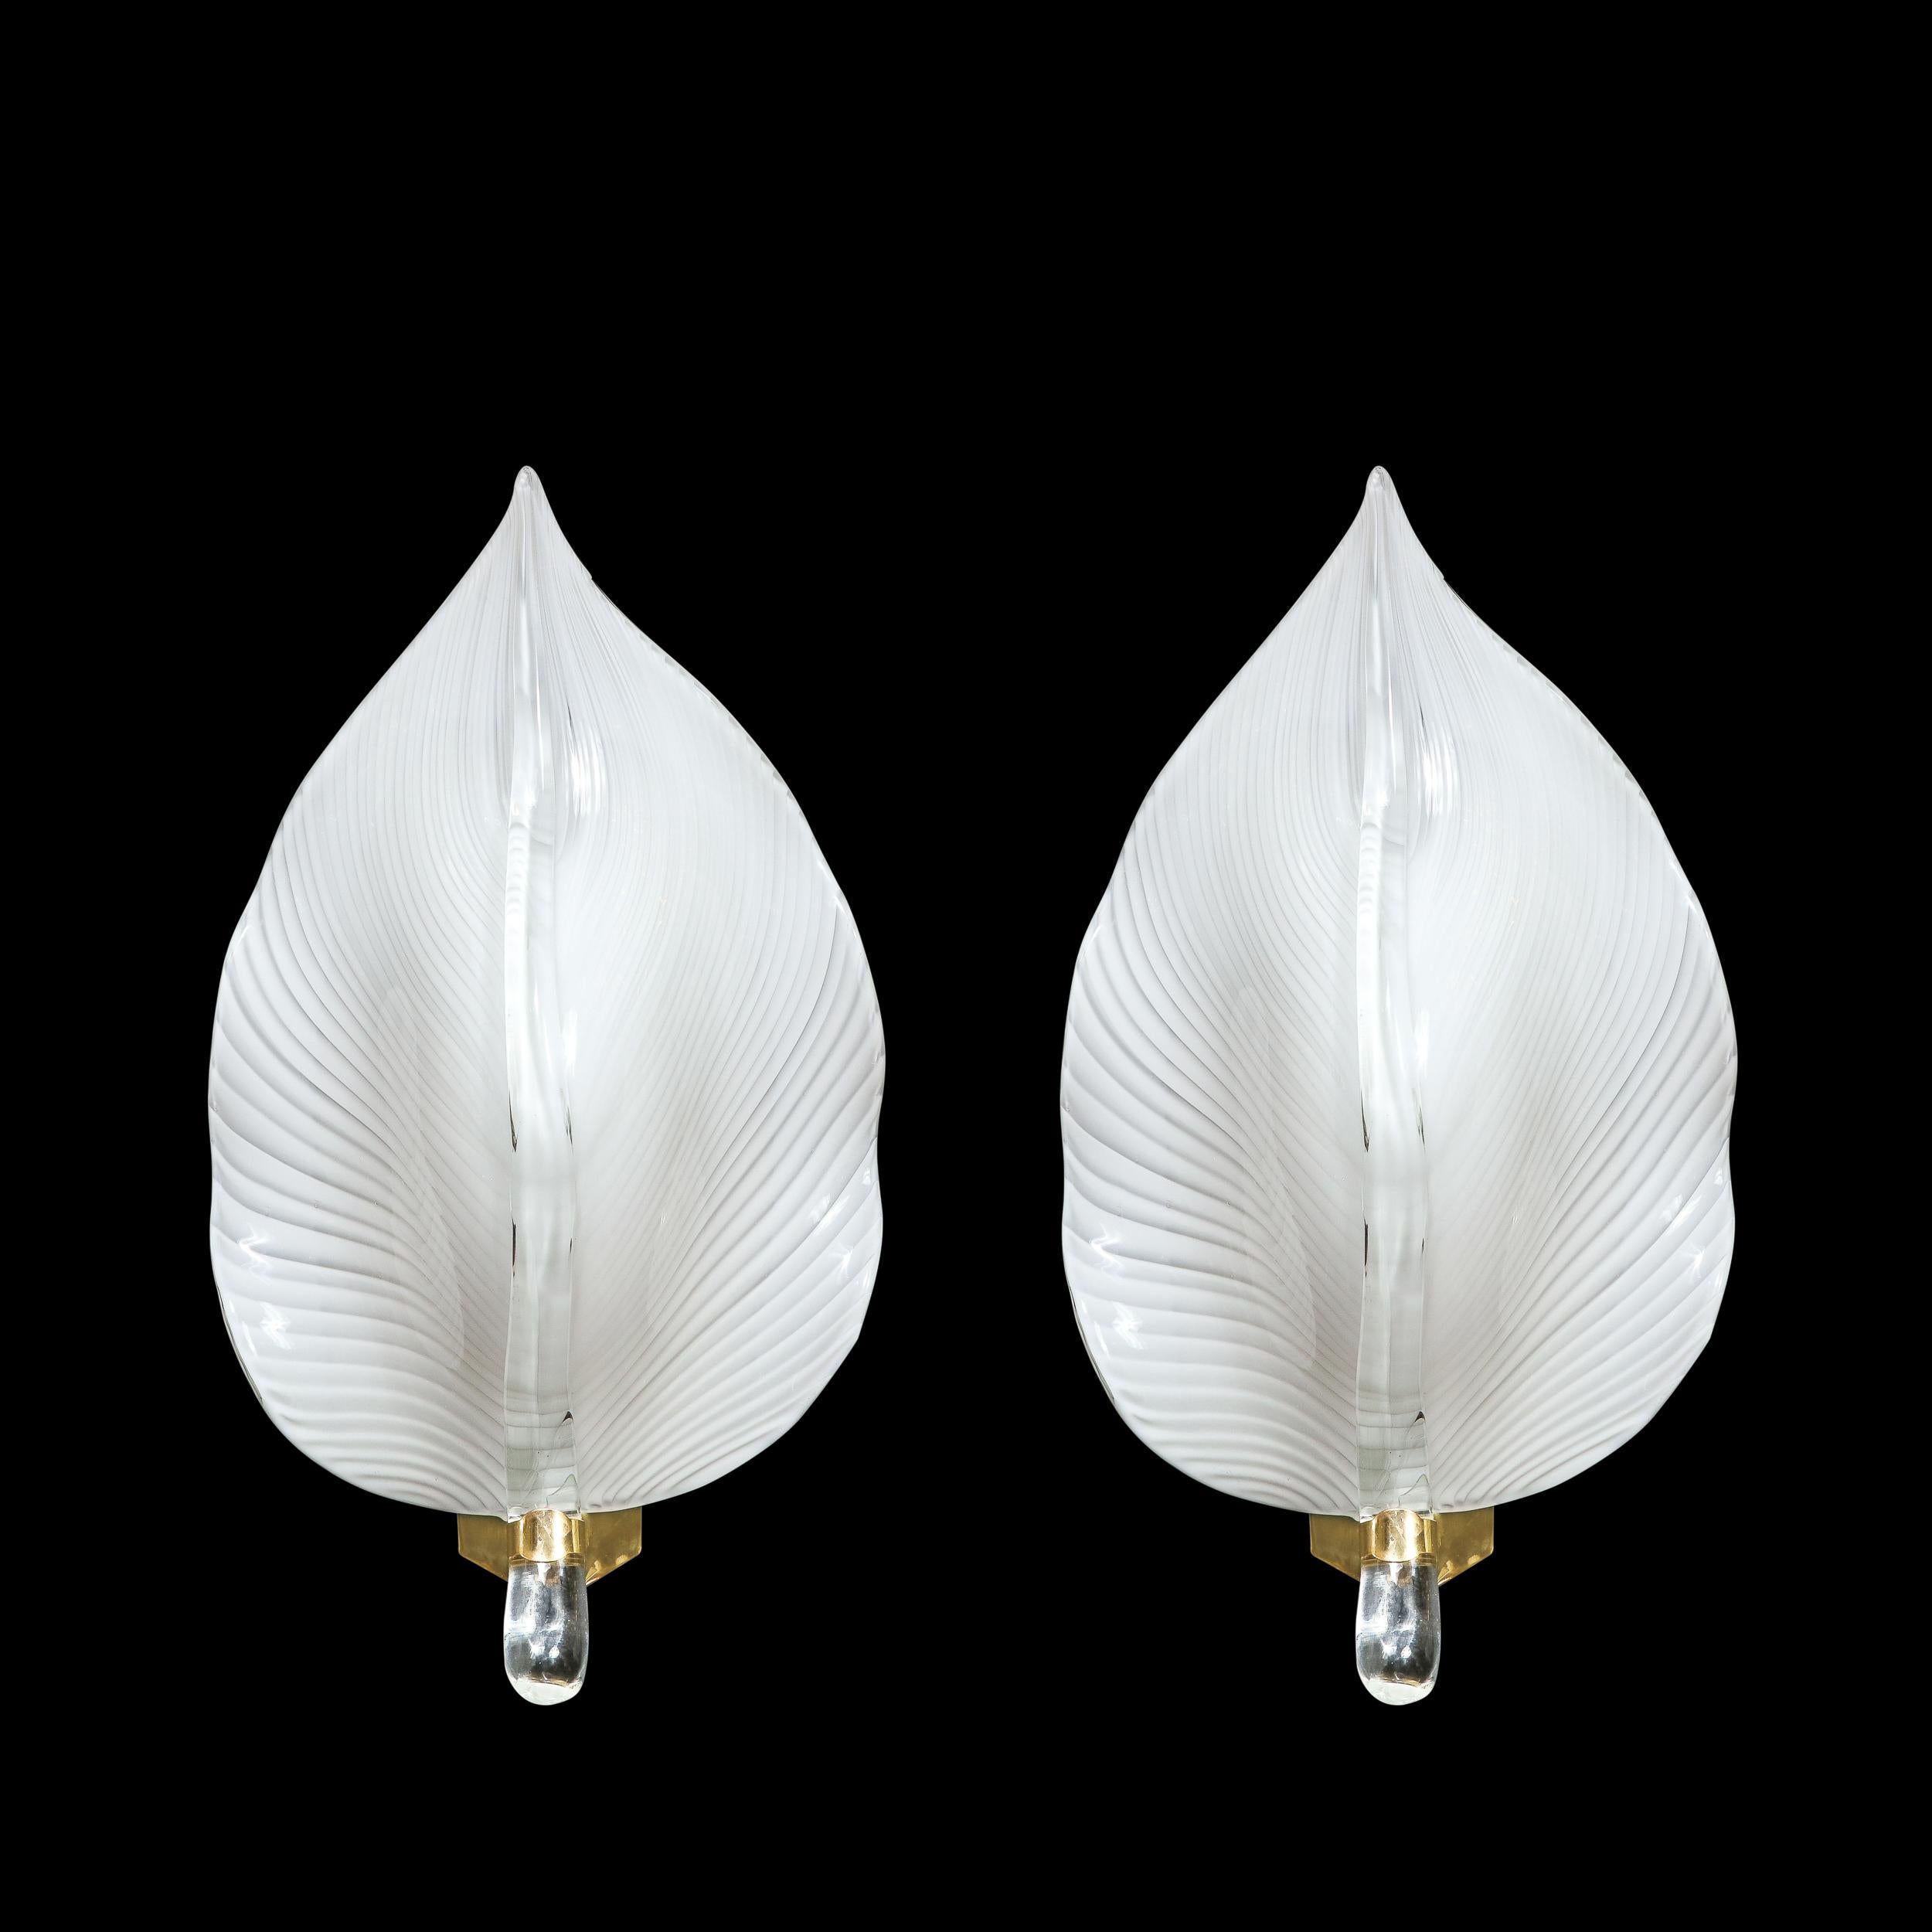 This Elegant Pair of Mid-Century Modenist Hand-Blown Murano Glass Leaf Sconces are created by the esteemed Murano Glass Artist Franco Luce and originate from Italy, Circa 1970. Highly elegant and deeply grounded in observation of nature, these